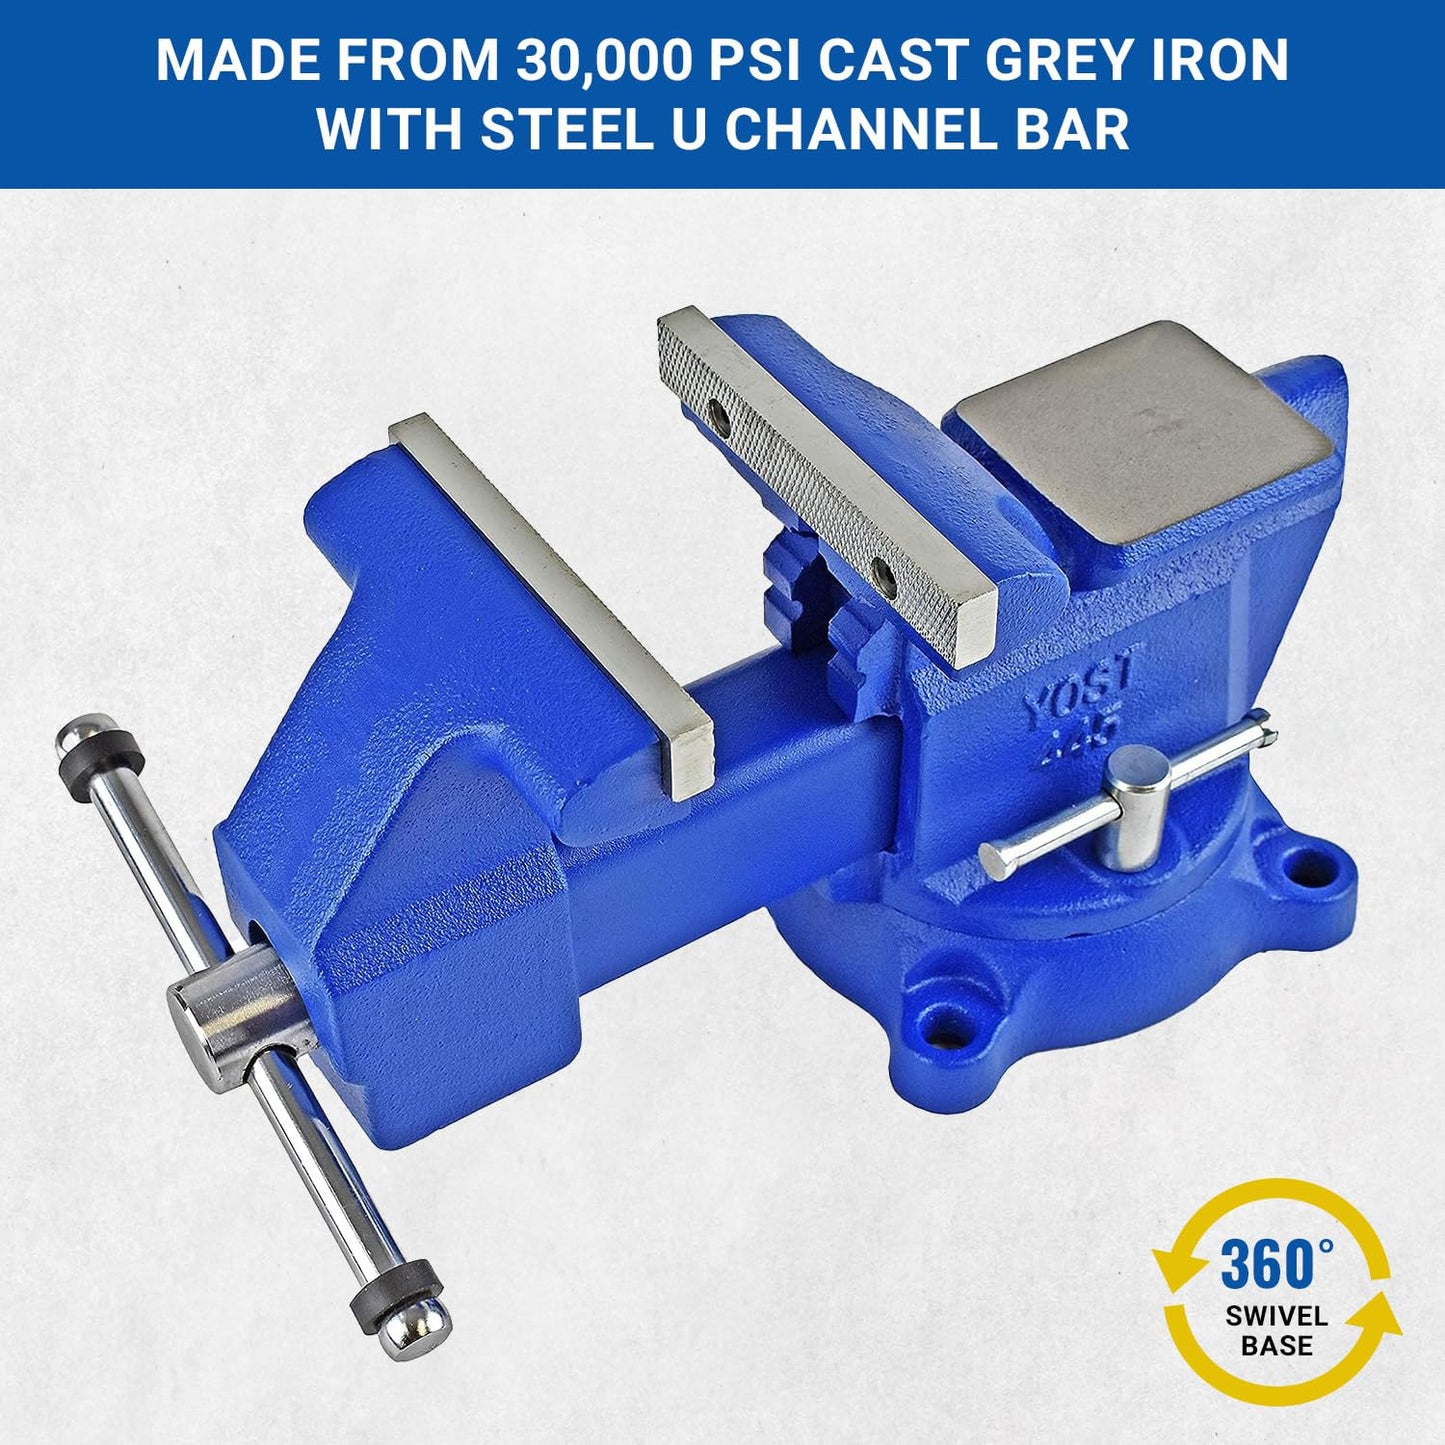 Yost Vises 445 Combination Vise | 4.5 Inch Jaw Width Utility Pipe and Bench Vise |Secure Grip with Swivel Base and Large Pipe Jaw Capacity | Made